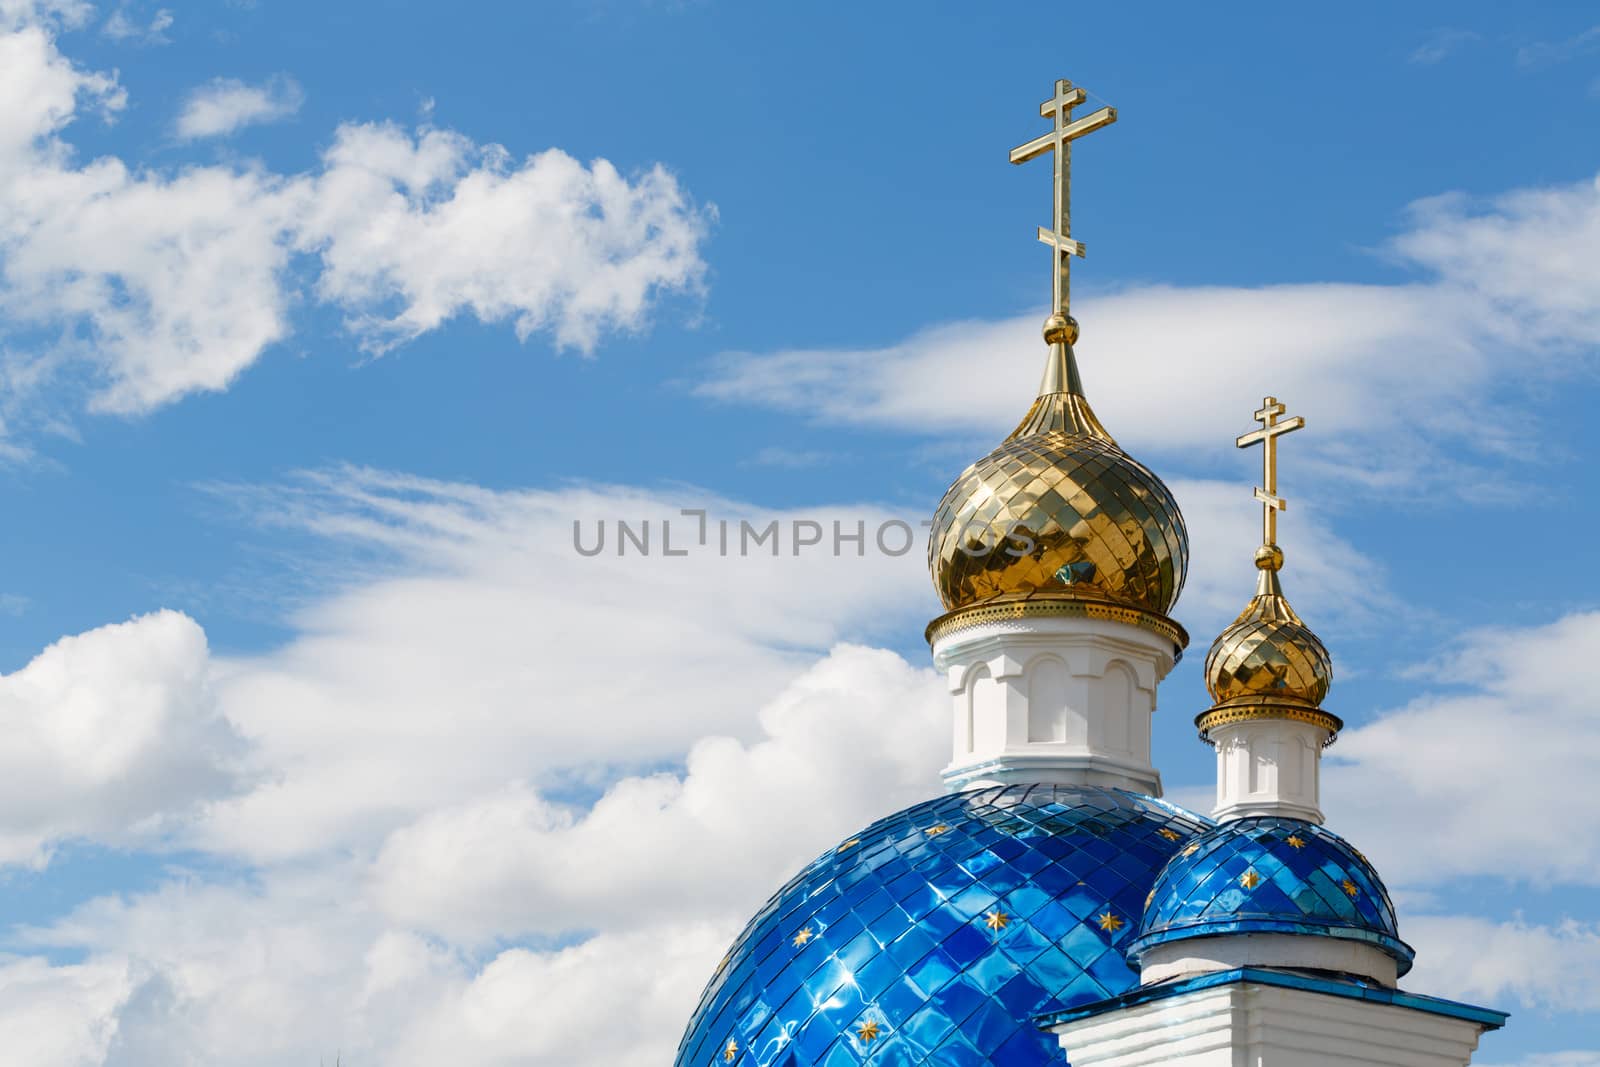 Domes of the church by Vagengeym